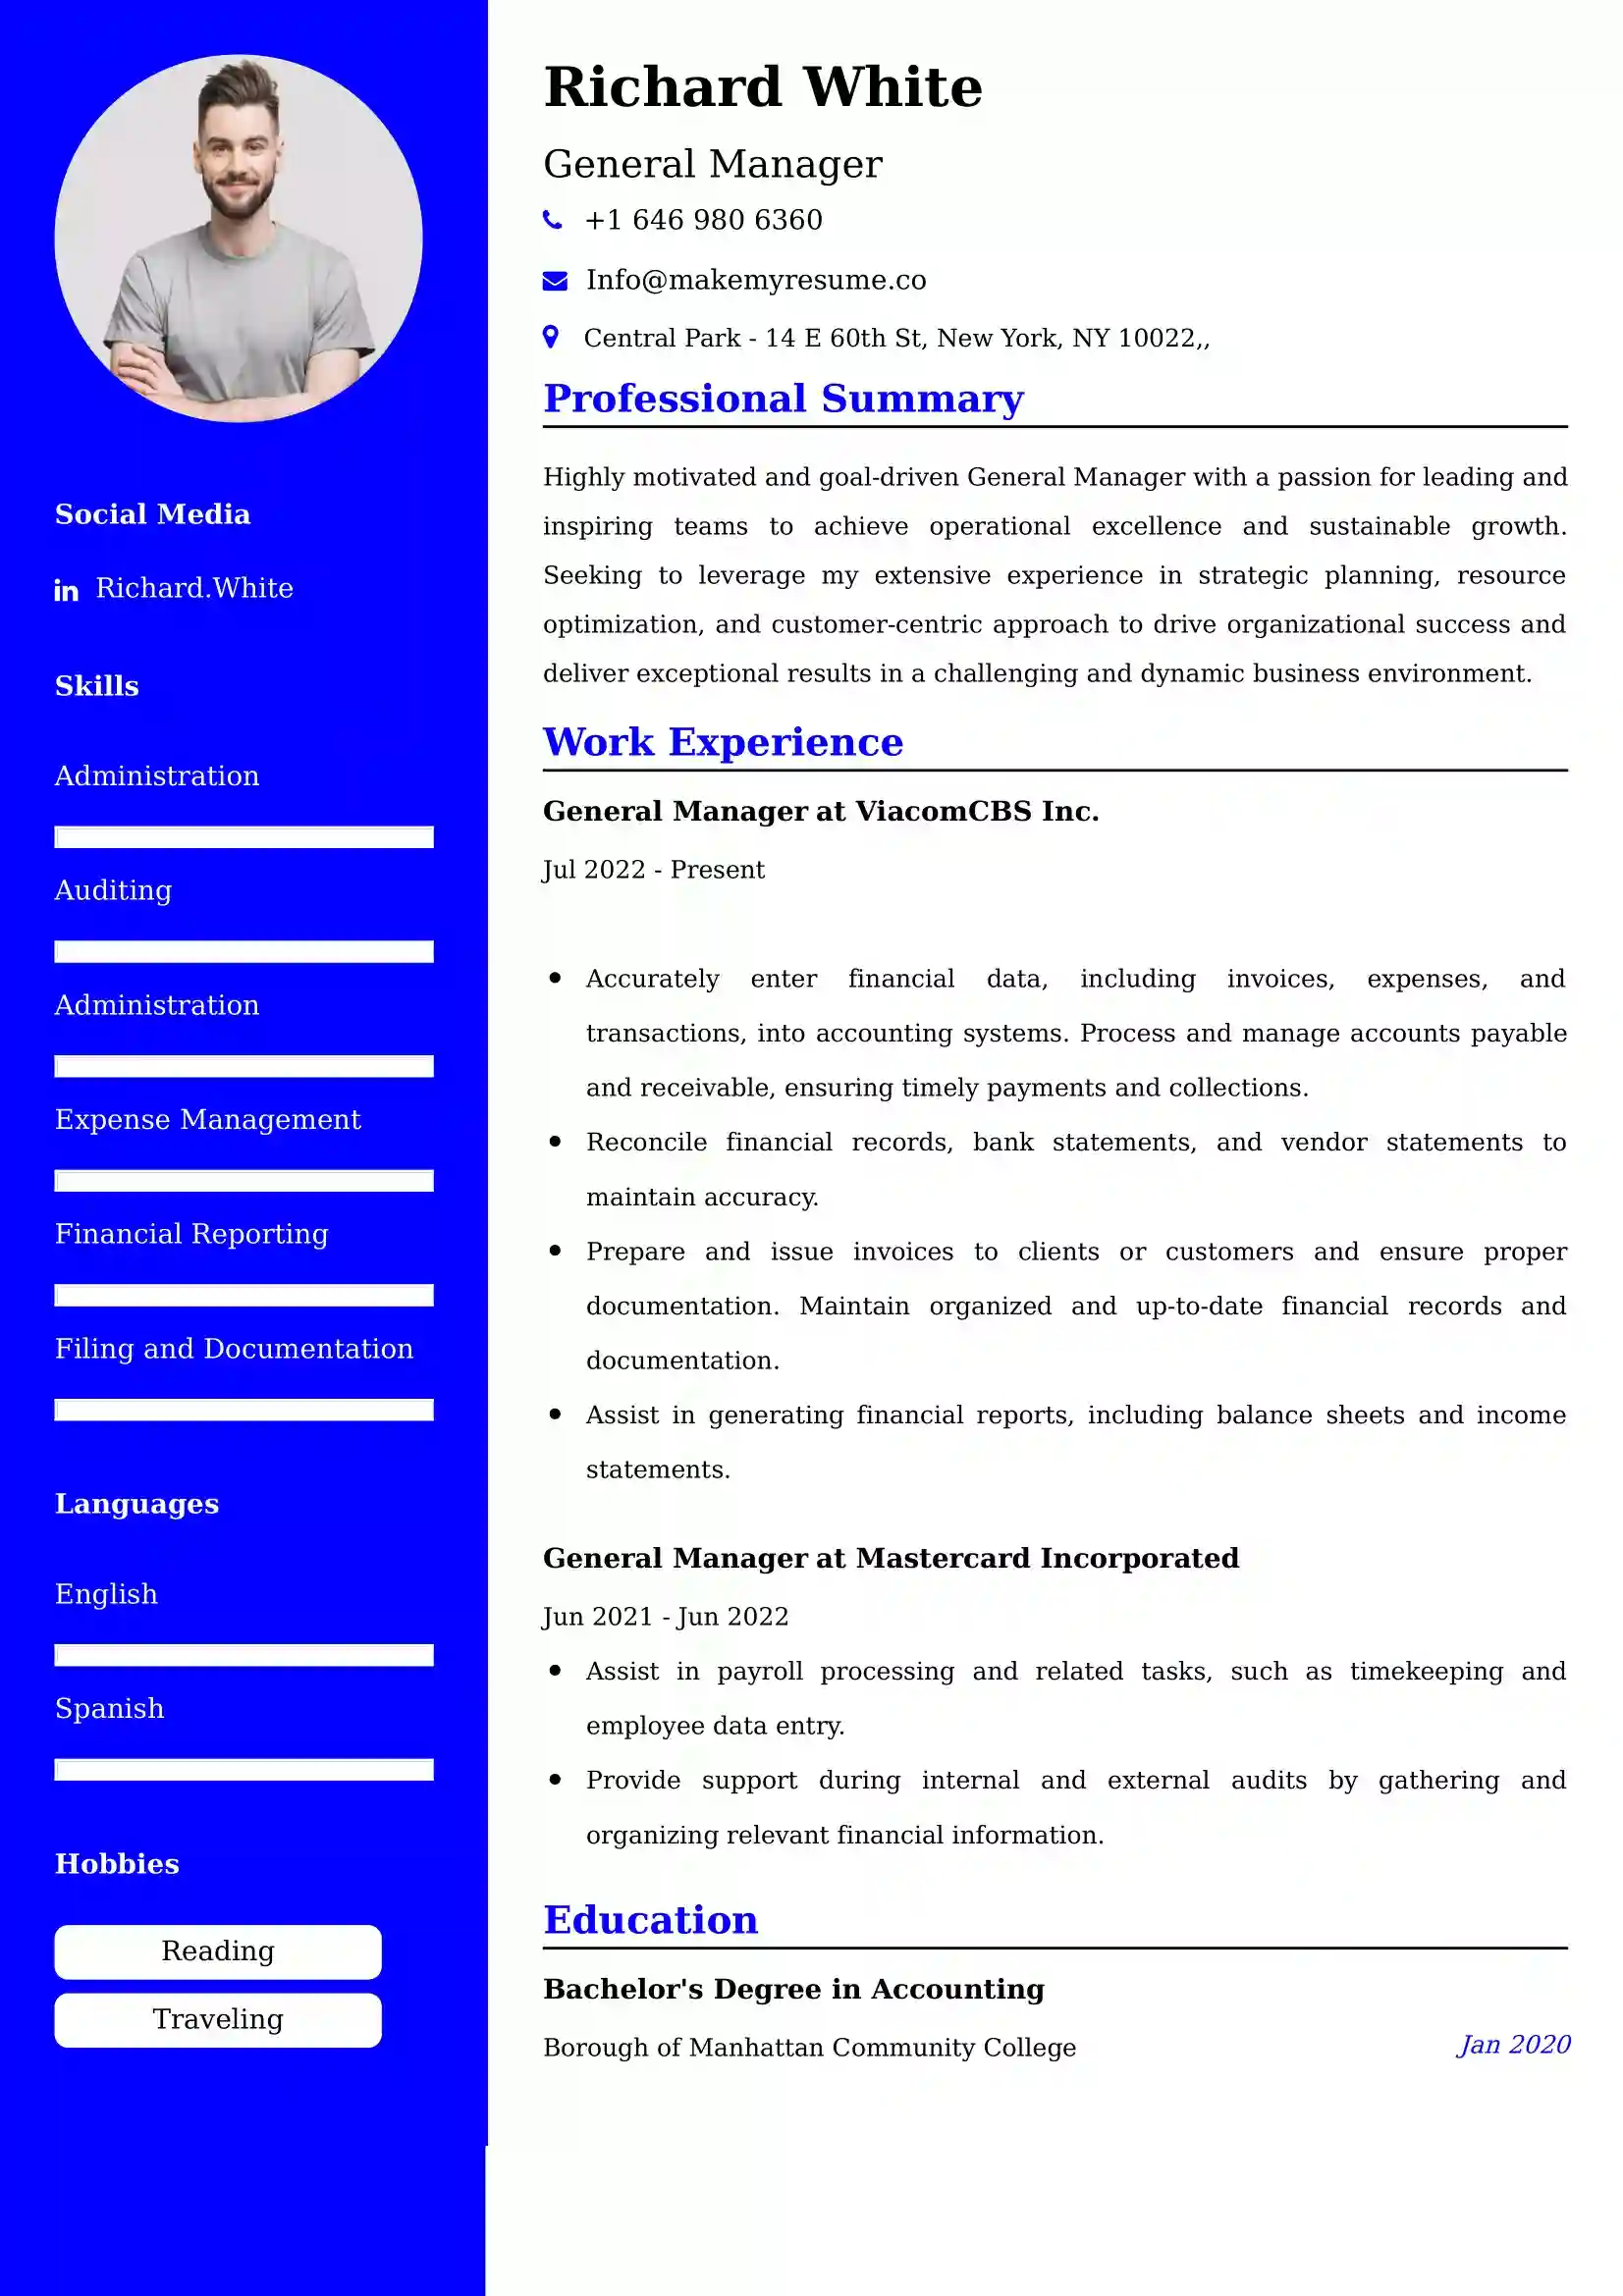 General Manager Resume Examples for UK Jobs - Tips and Guide